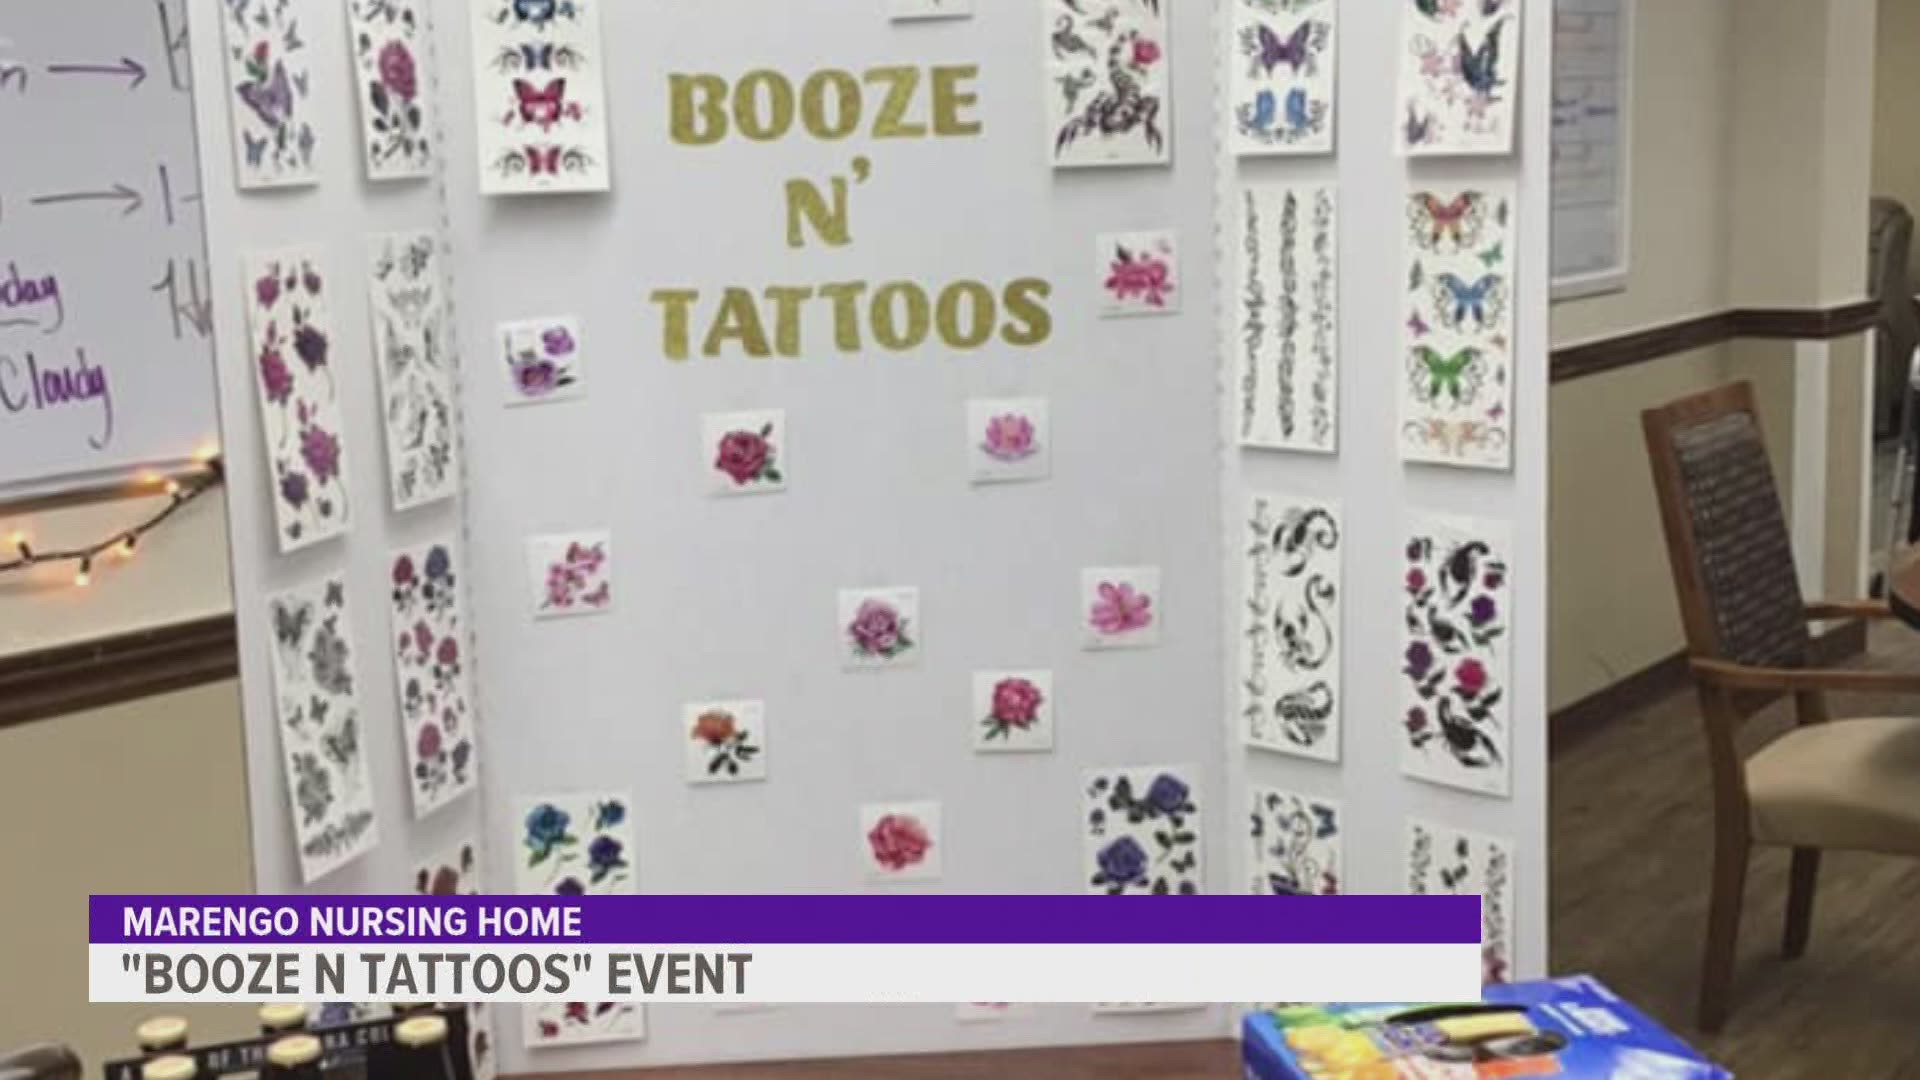 The residents got to pick out their own washable tattoos and enjoy a drink.